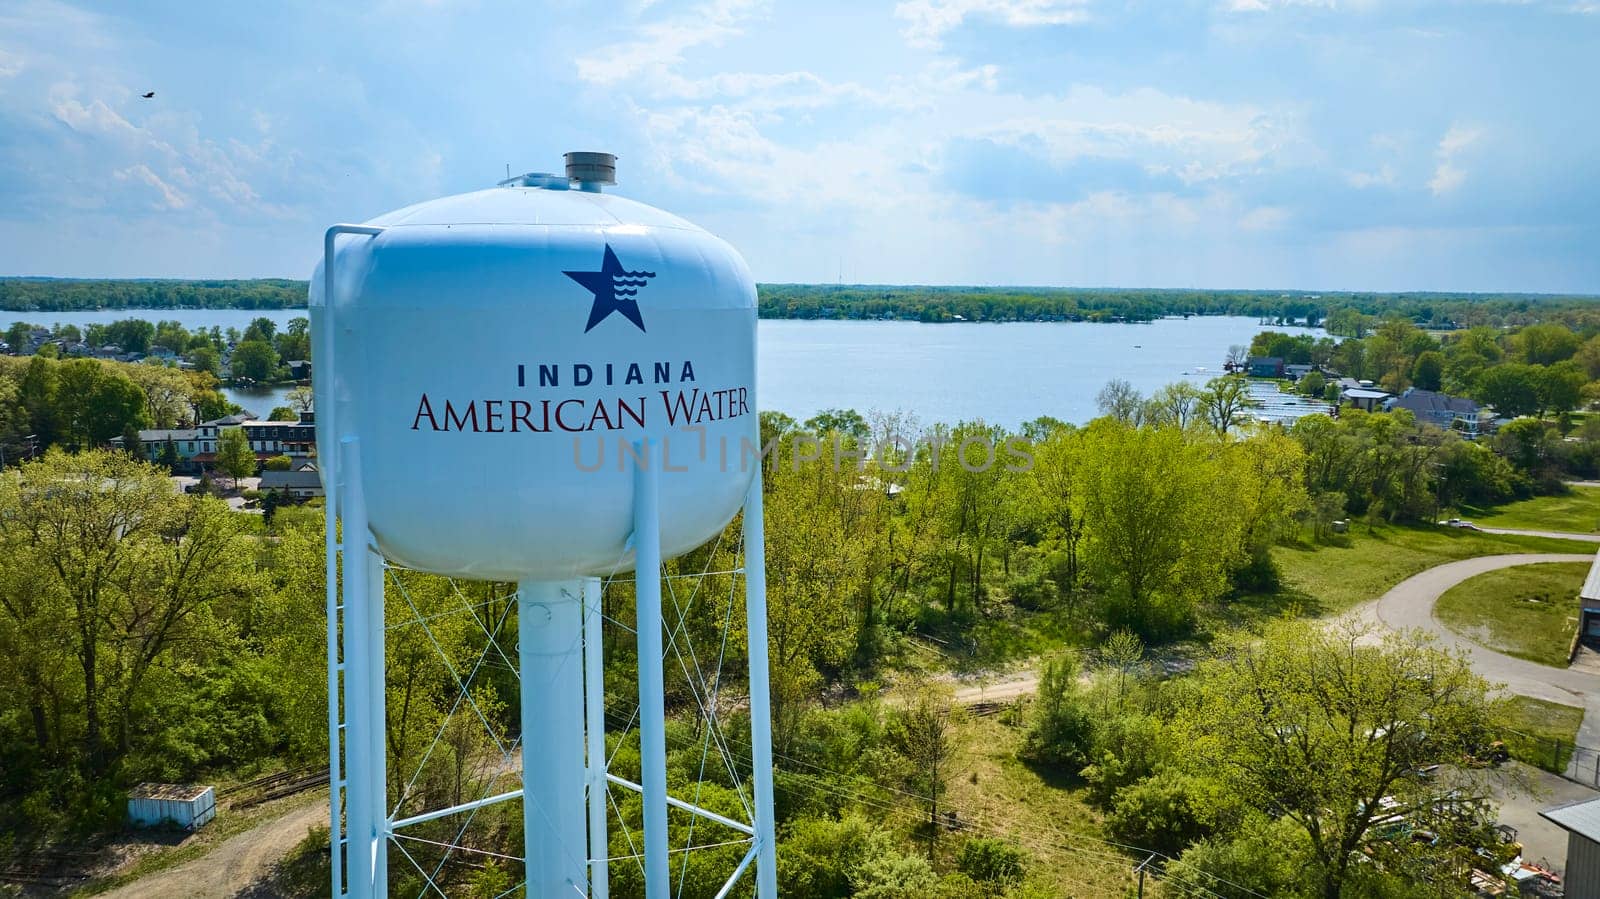 Elevated view of Indiana American Water tower in lush Warsaw setting, showcasing community infrastructure and natural beauty.